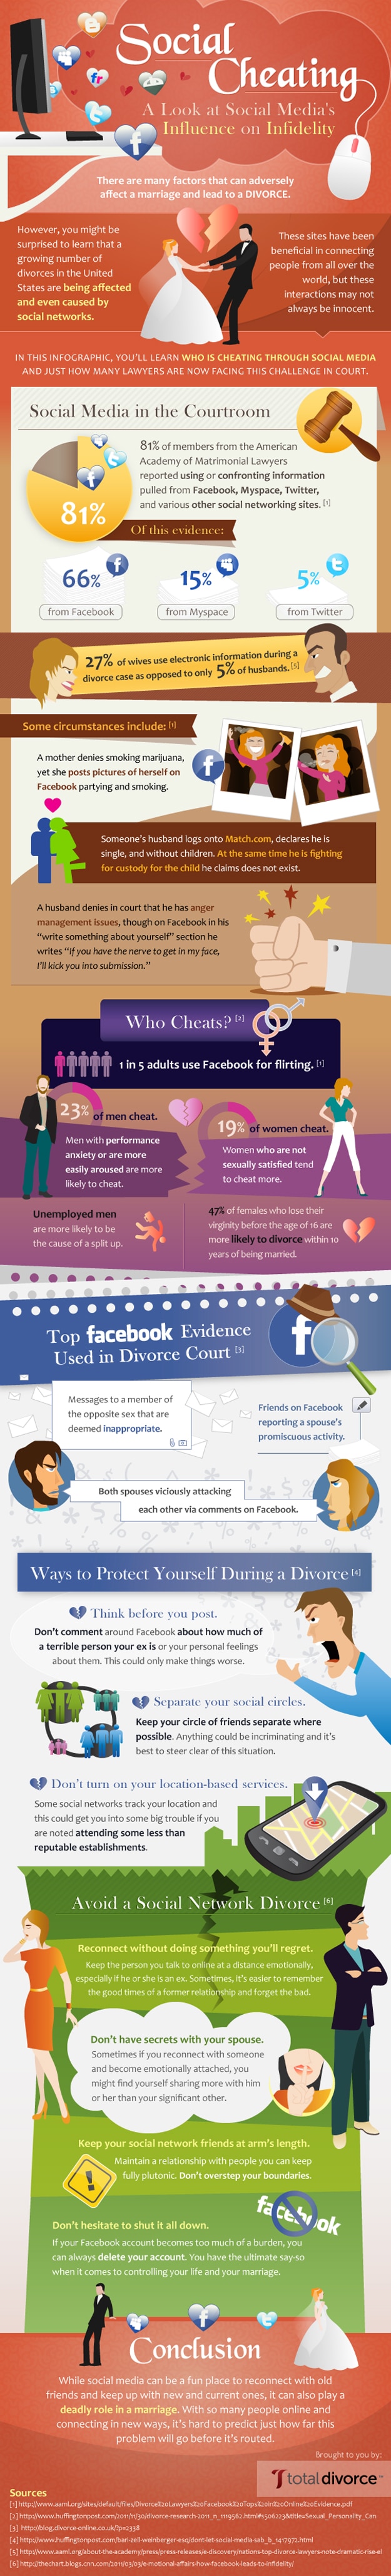 Social-Cheating-and-Facebook-Infographic